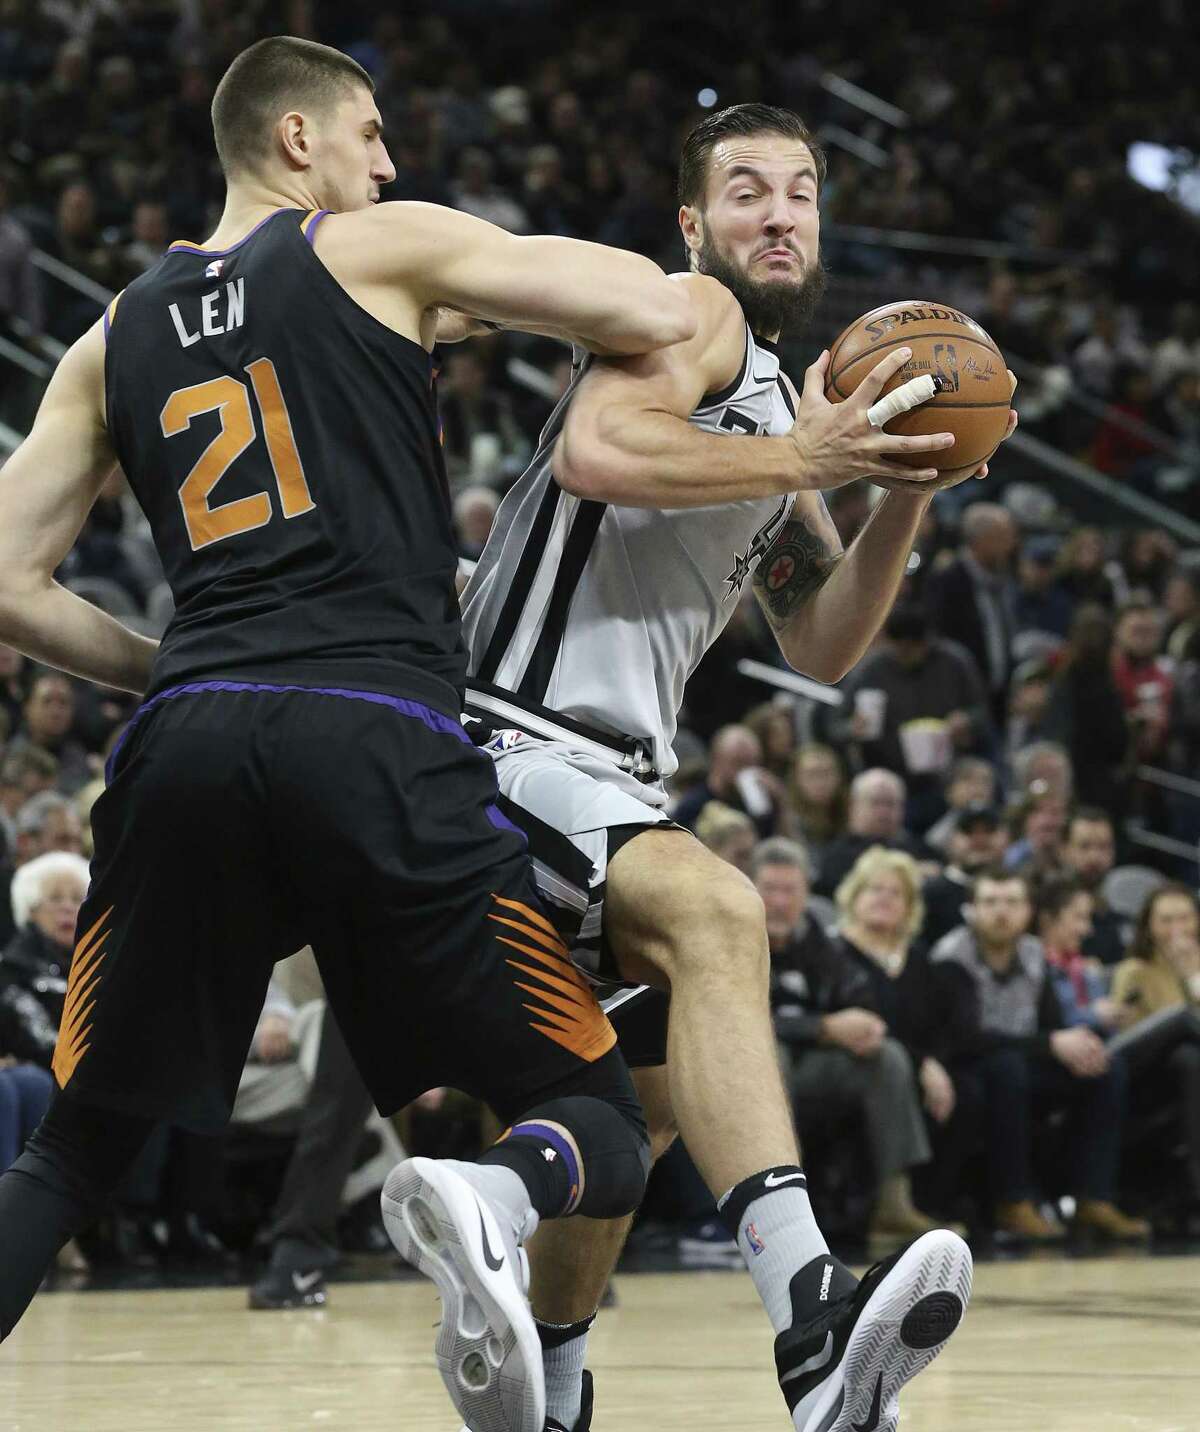 Joffrey Lauvergne is guarded closely by Alex Len in the lane as the Spurs host the Suns at the AT&T Center on January 5, 2018